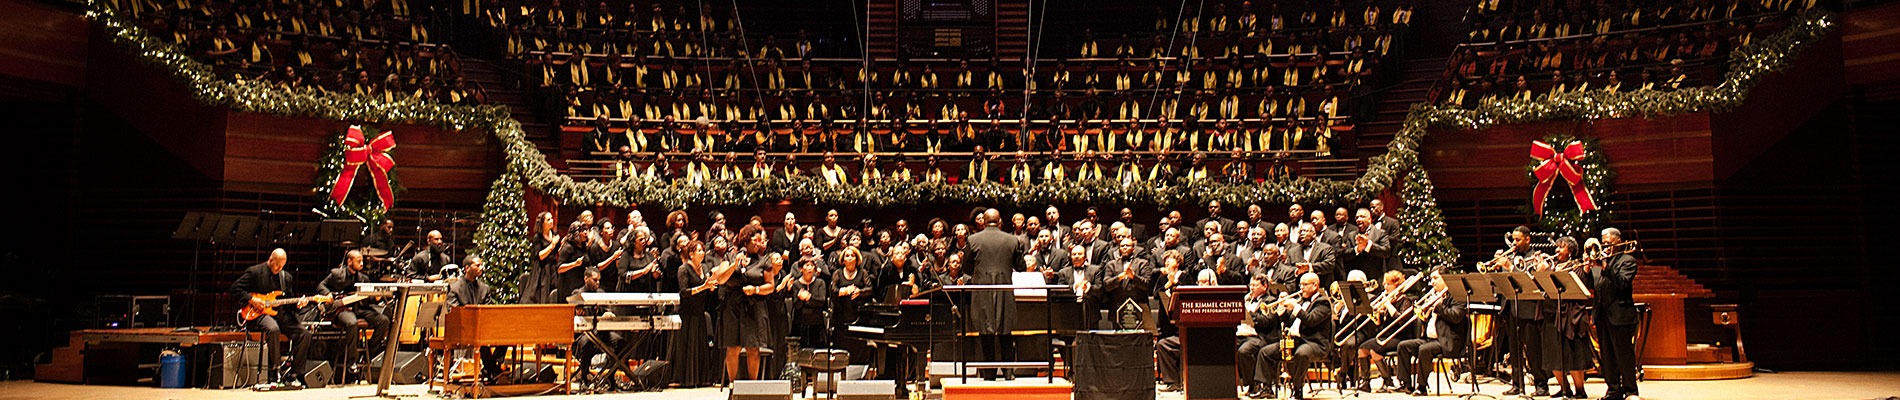 Choirs perform in Verizon Hall at the Kimmel Center for A Soulful Christmas